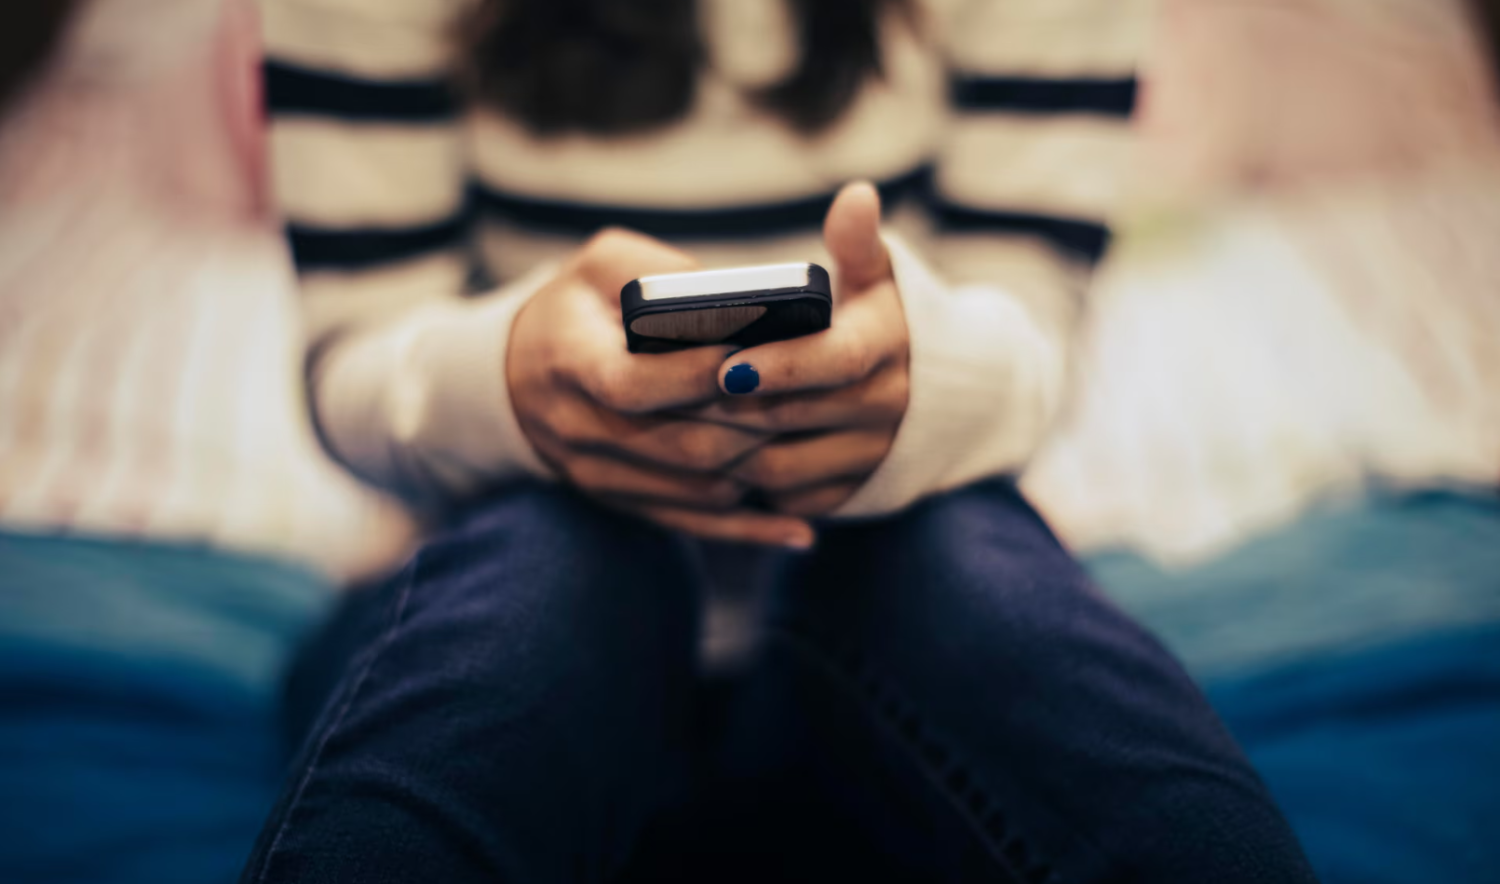 Florida is one of several states that has taken action recently to limit teenagers’ exposure to social media. Photograph: The Good Brigade/Getty Images